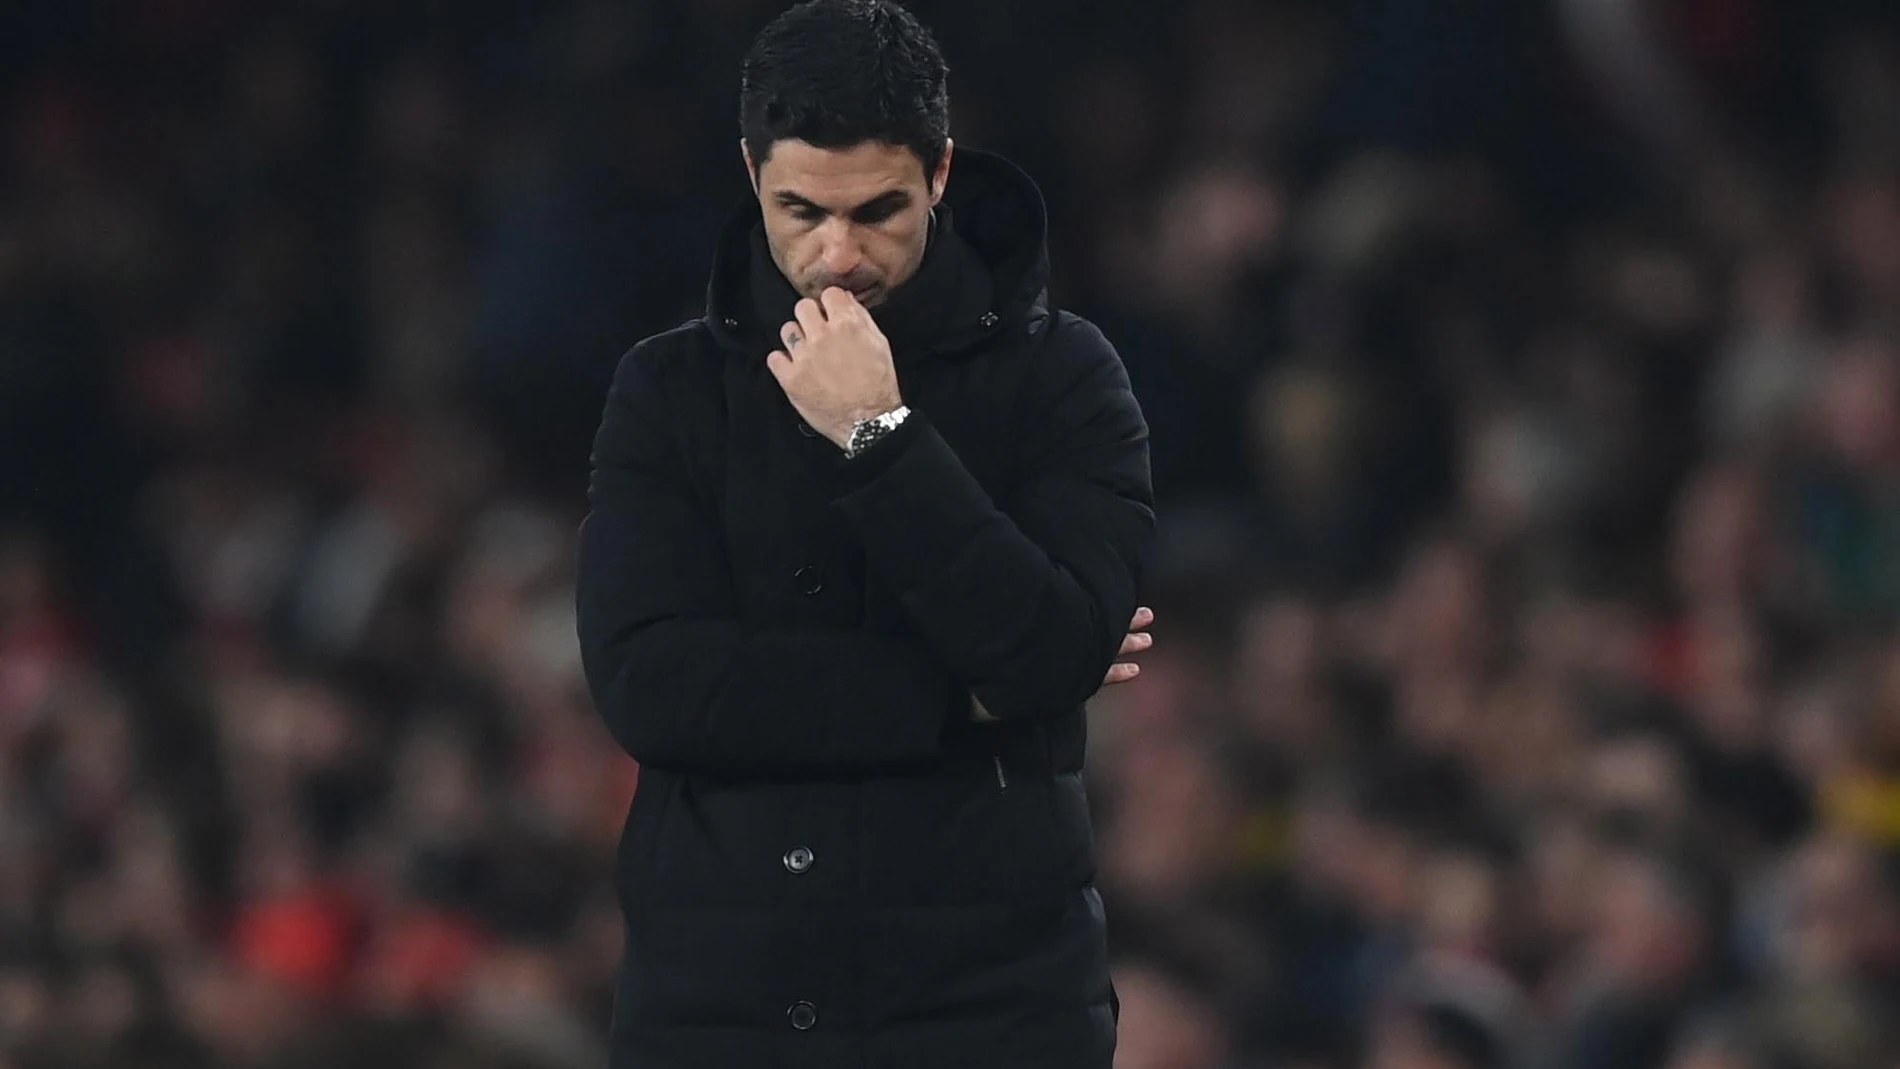 London (United Kingdom), 21/04/2023.- Arsenal manager Mikel Arteta reacts during the English Premier League soccer match between Arsenal and Southampton at the Emirates Stadium in London, Britain, 21 April 2023. (Reino Unido, Londres) EFE/EPA/NEIL HALL